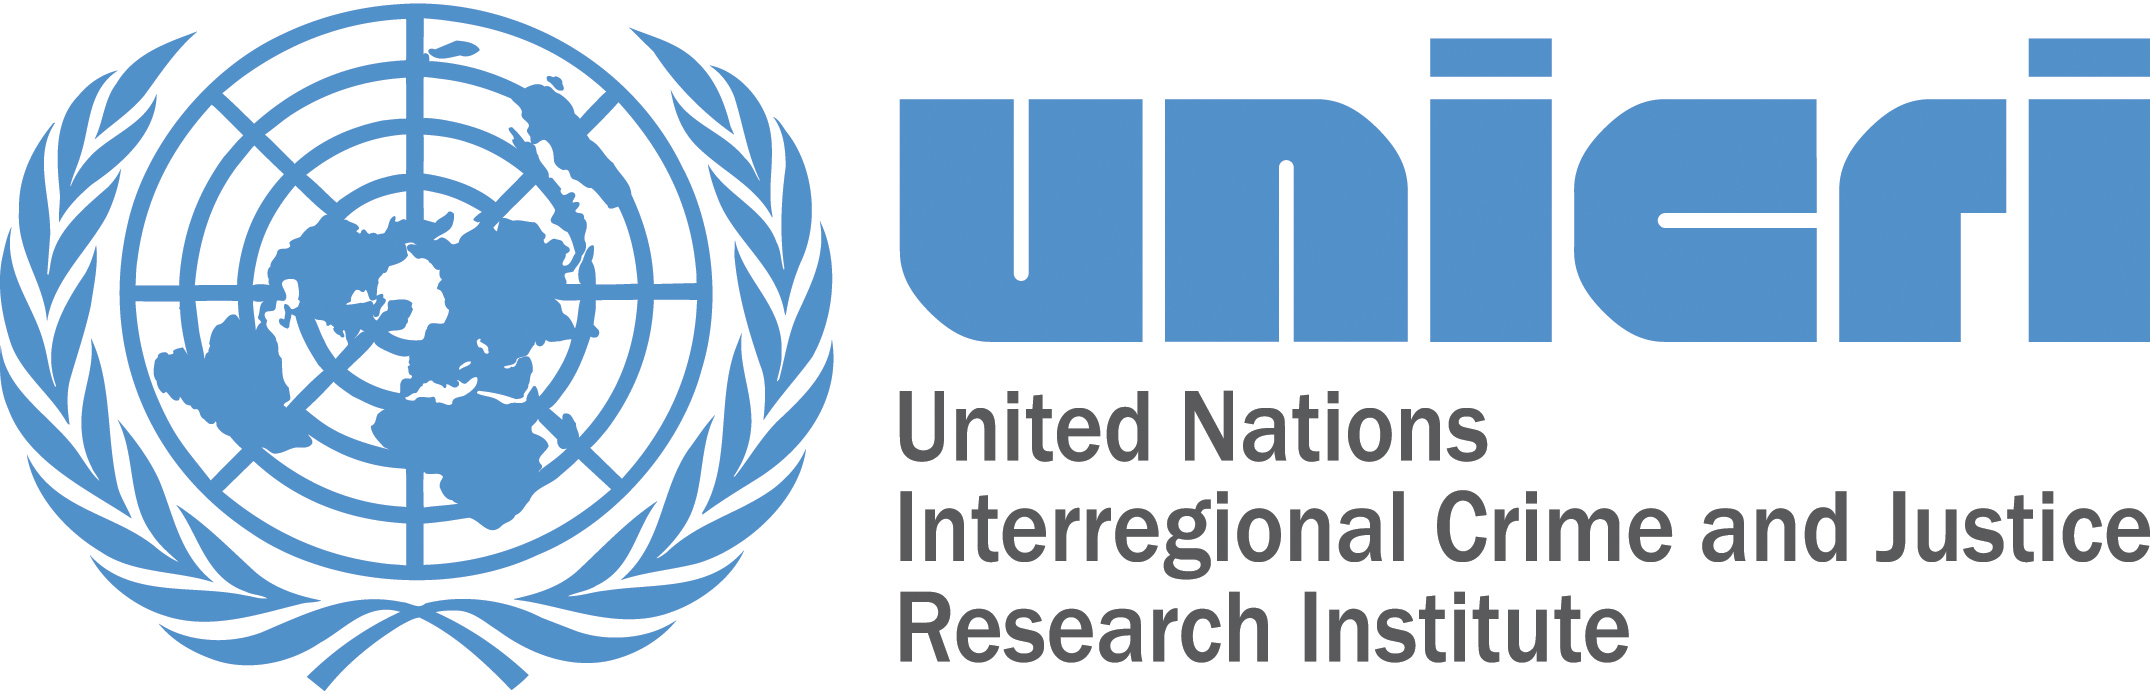 Link for United Nations Interregional Crime and Justice Research Institute